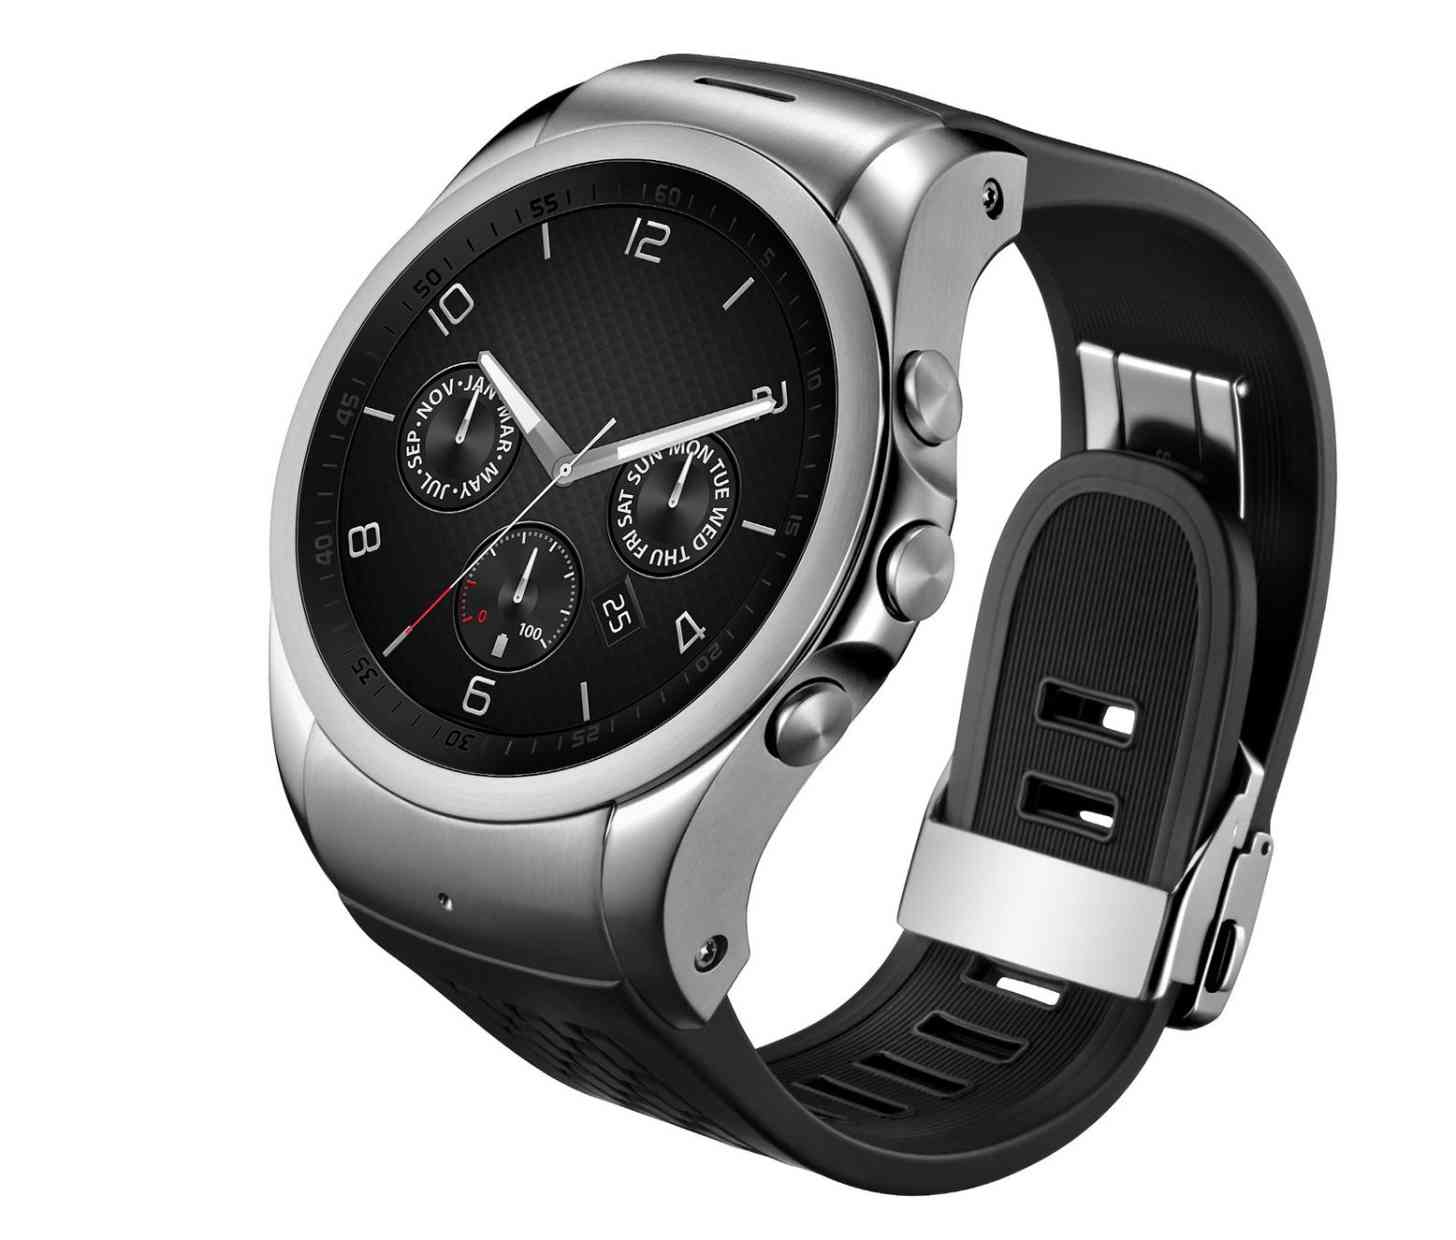 LG Watch Urbane LTE official